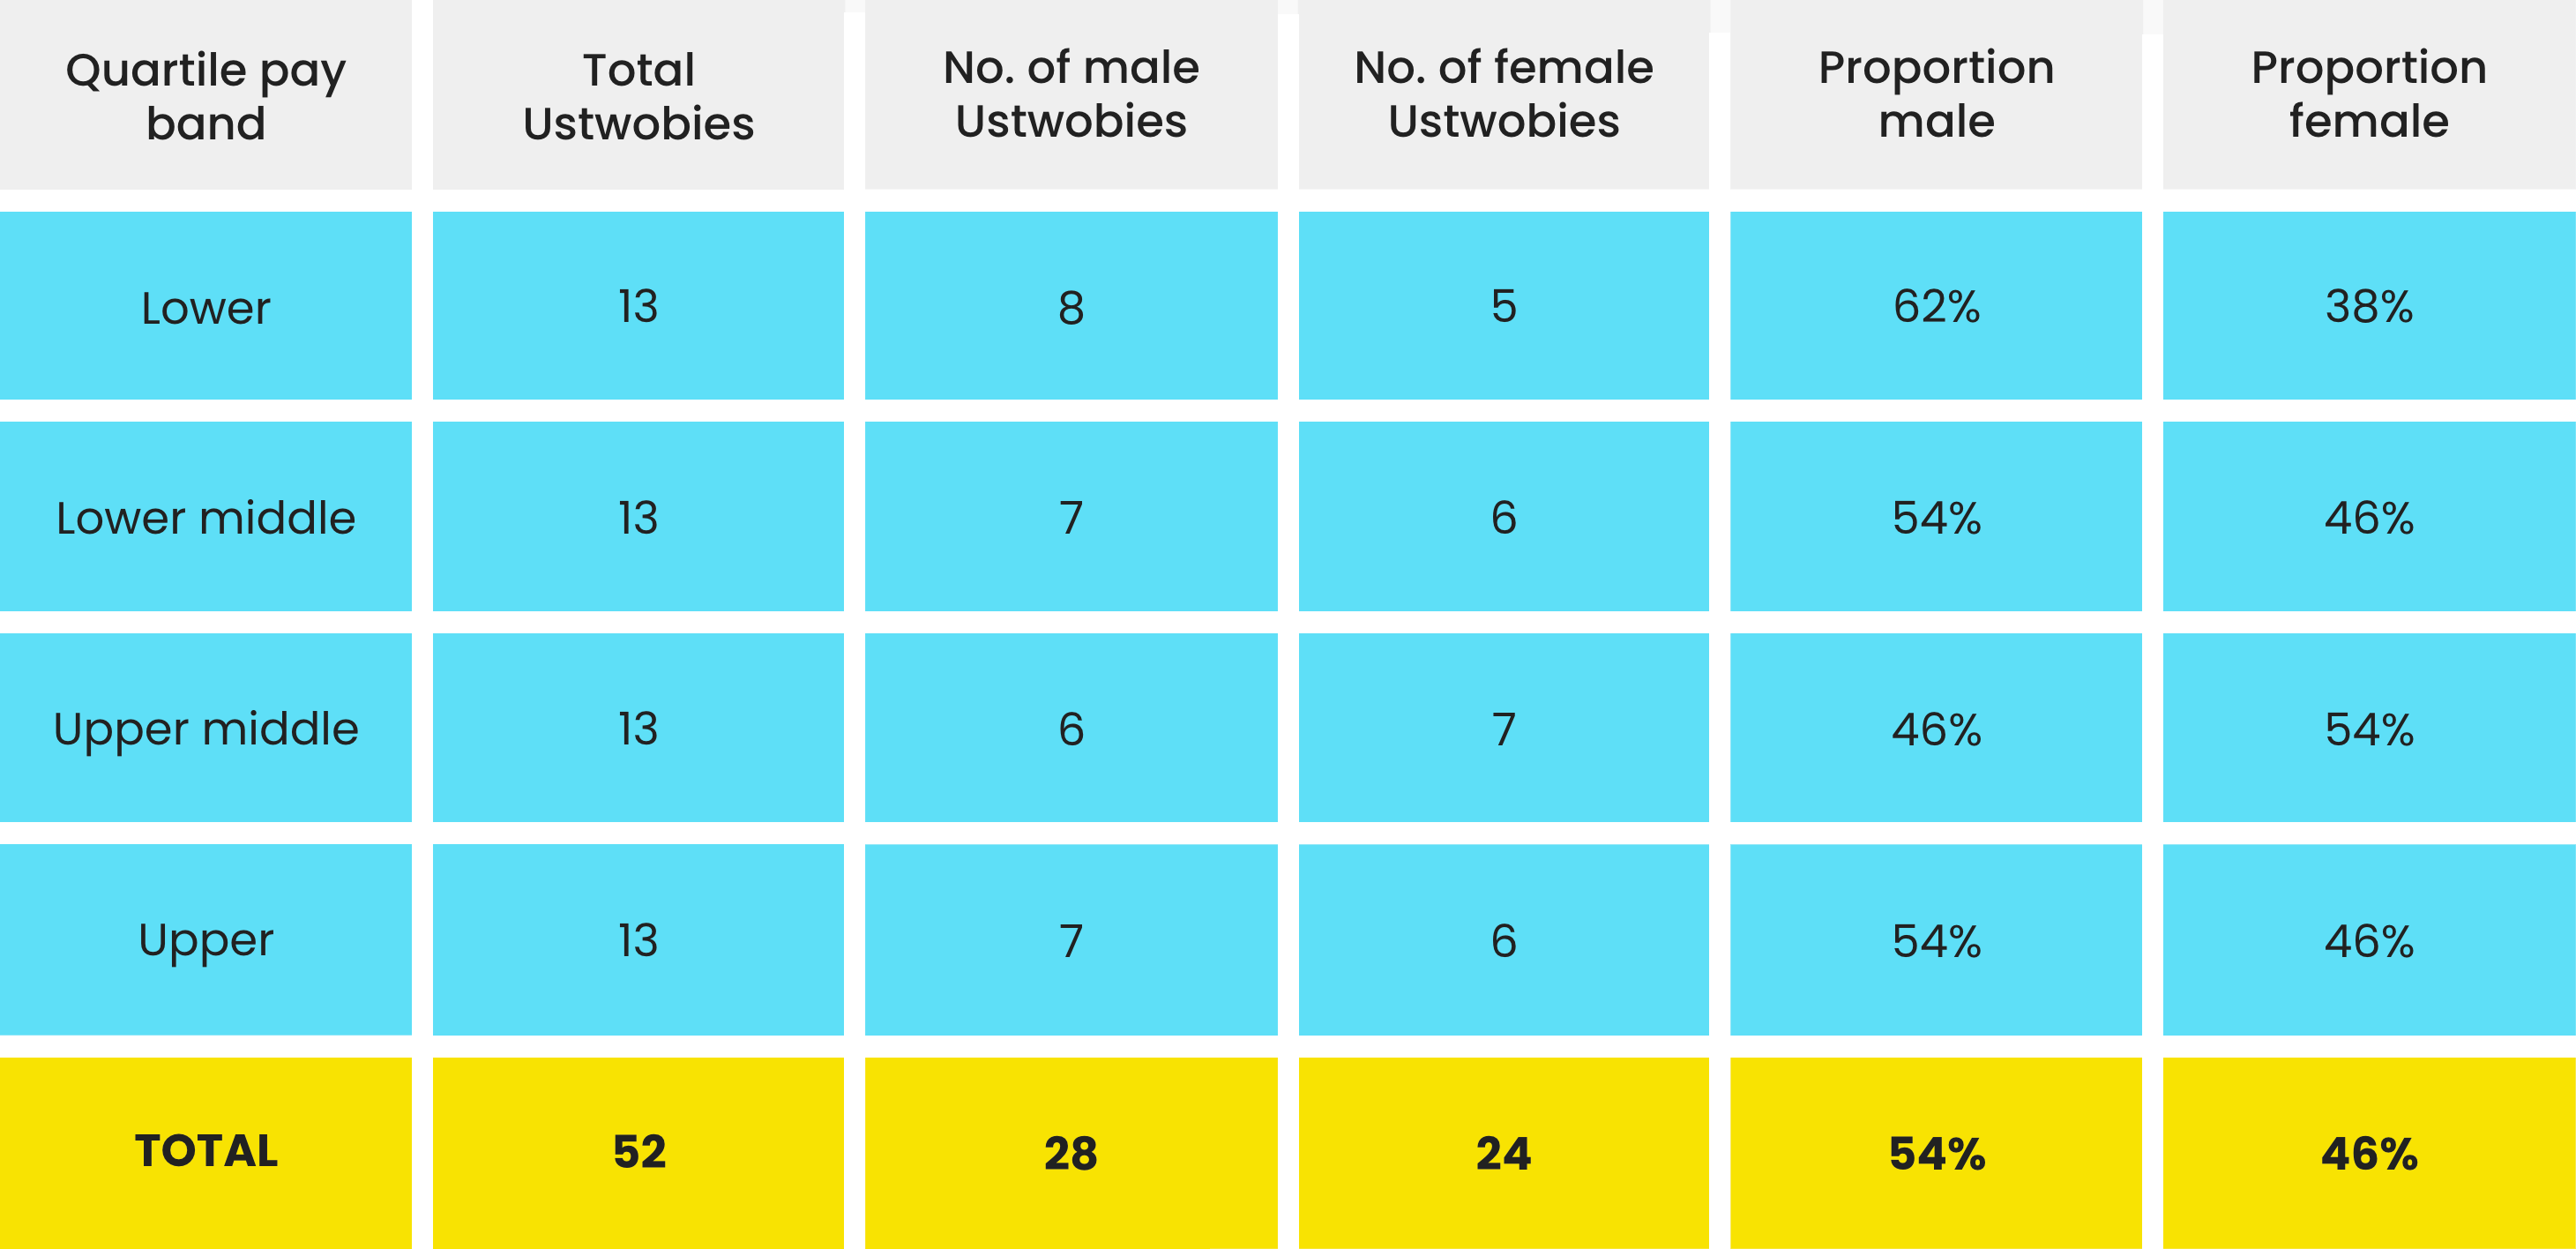 ustwo-gender-pay-gap-proportions-2021